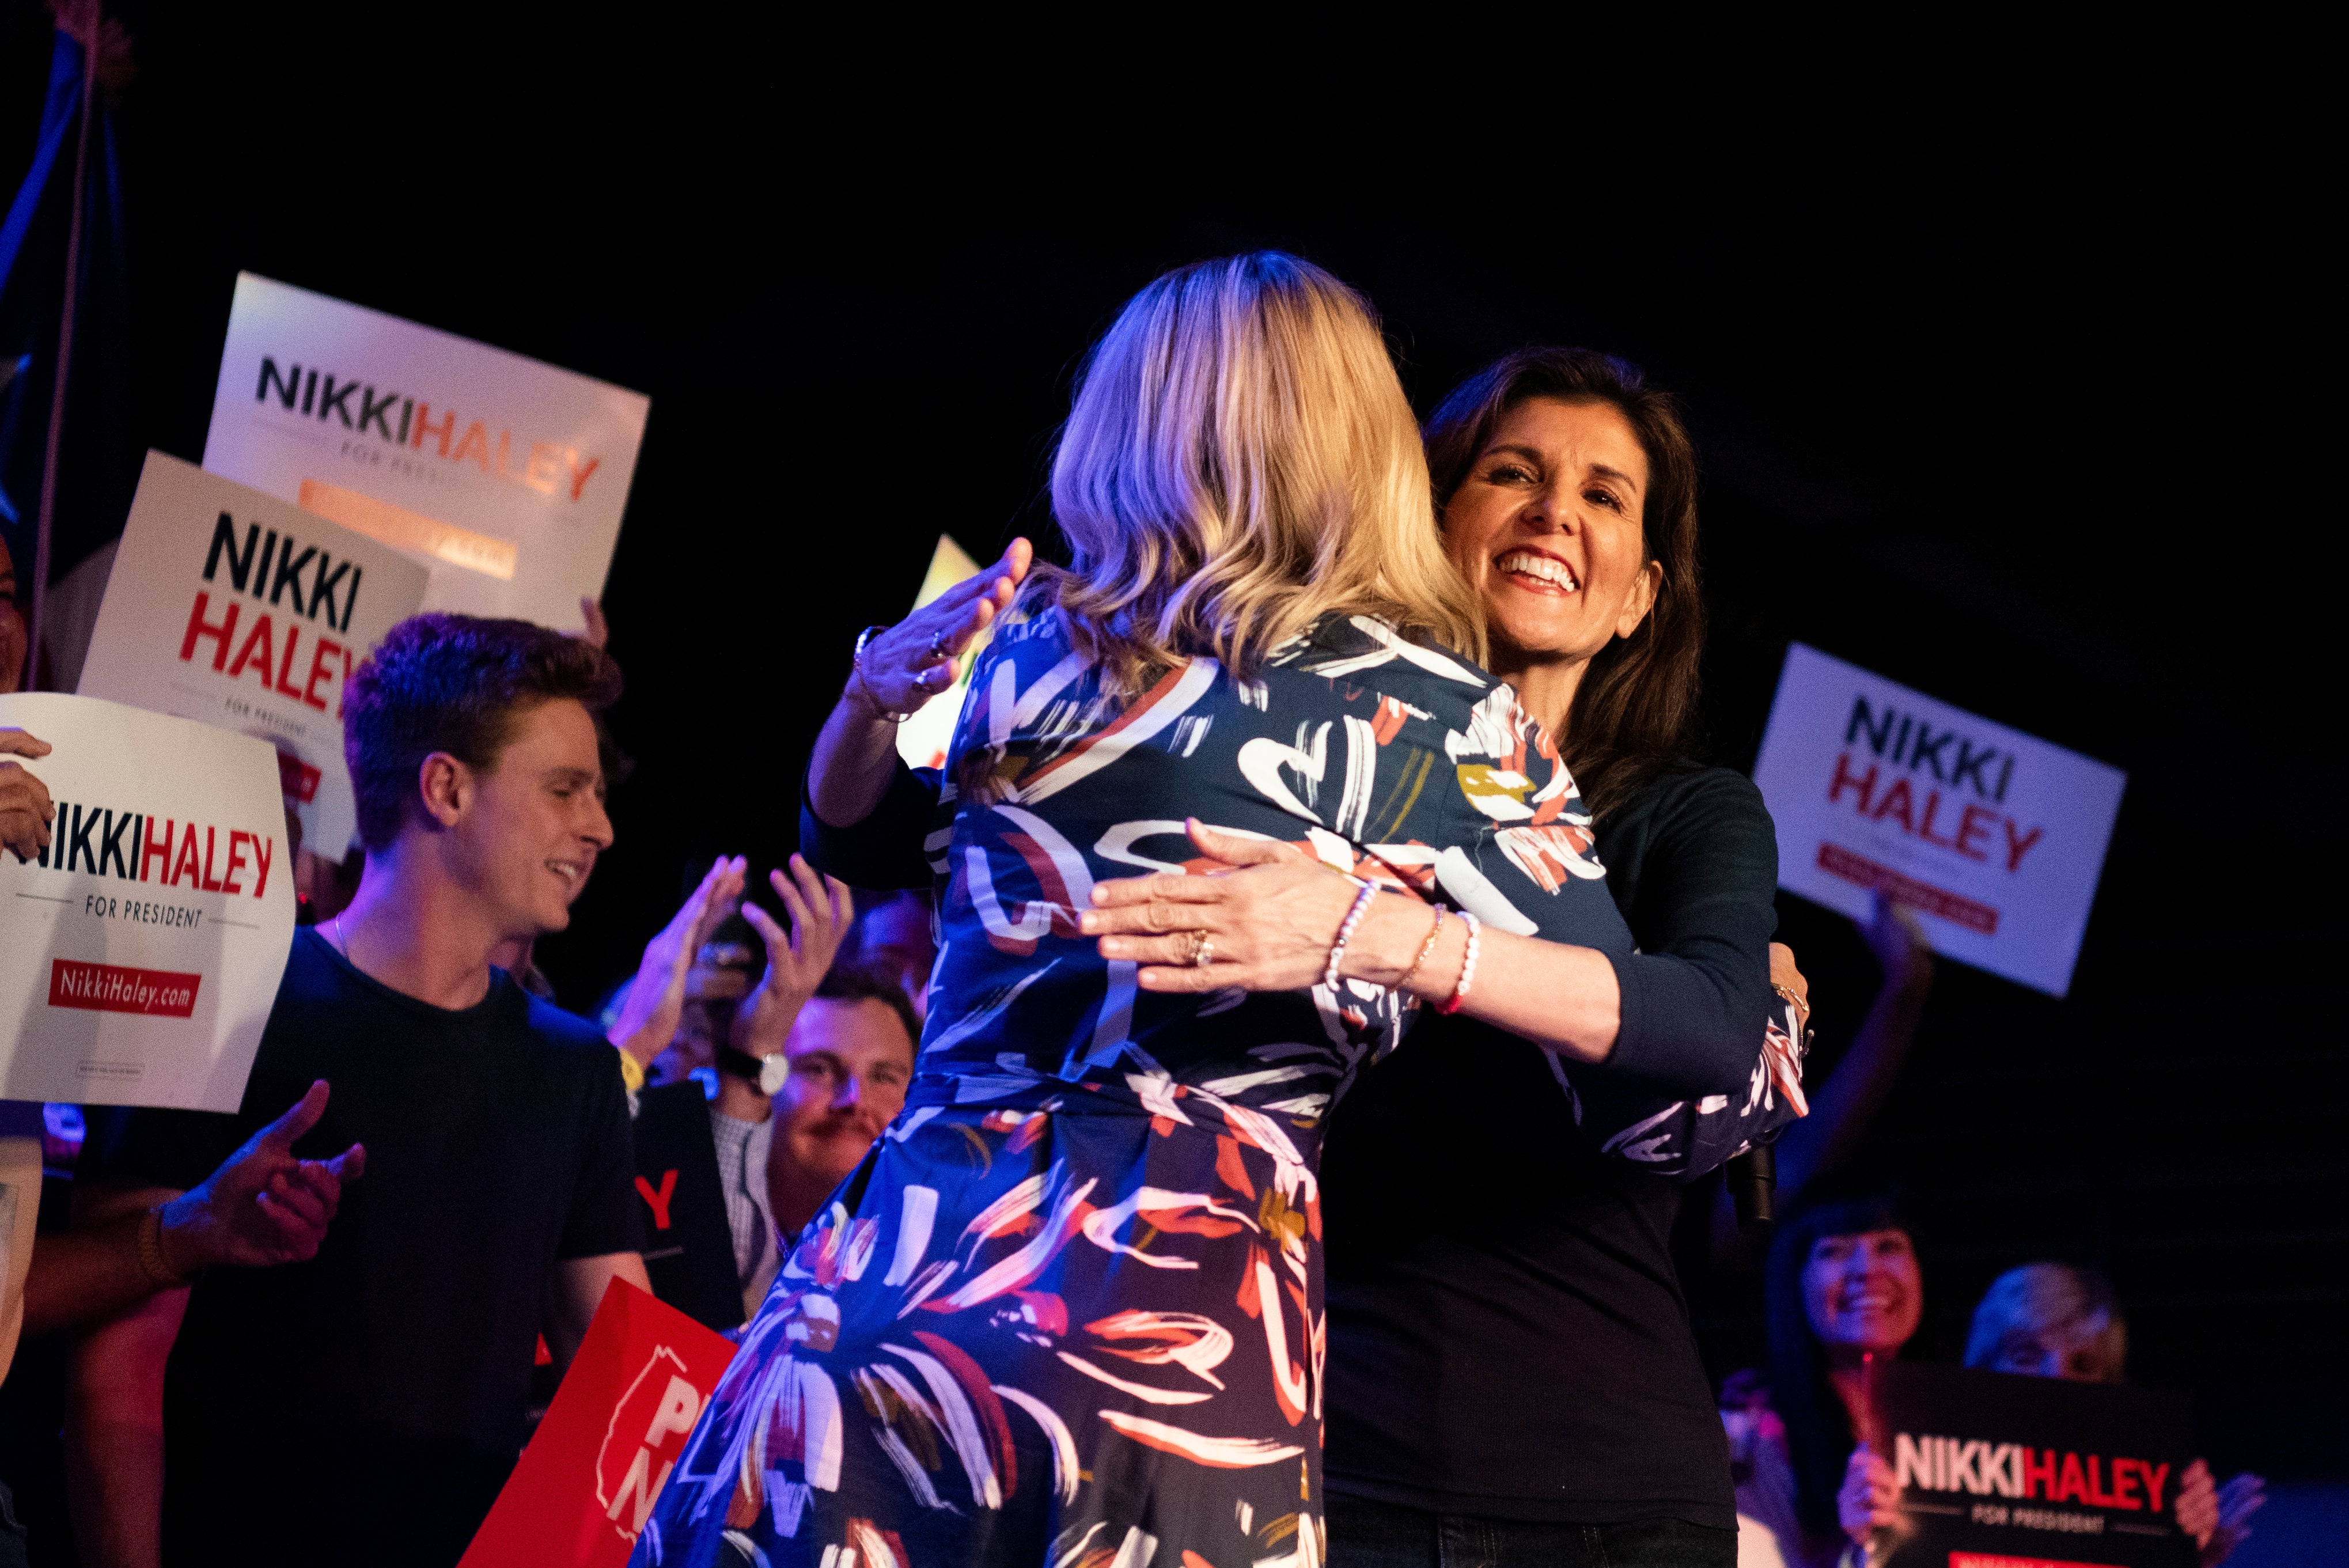 There was no watch party for Nikki Haley on Super Tuesday – her last public appearance was at this rally in Texas on Monday